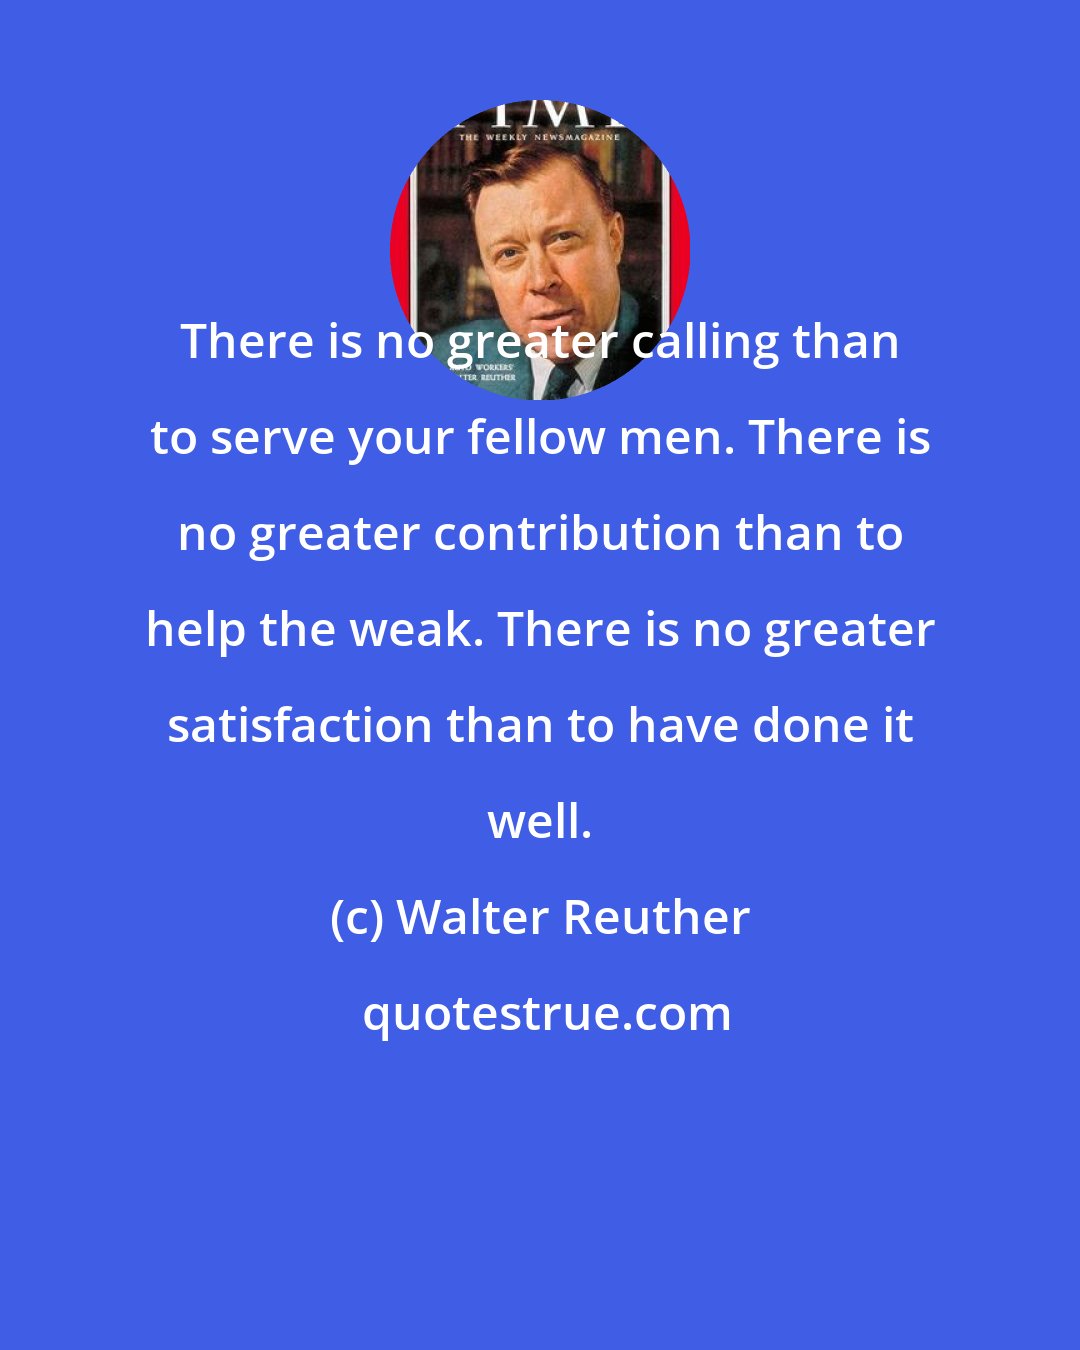 Walter Reuther: There is no greater calling than to serve your fellow men. There is no greater contribution than to help the weak. There is no greater satisfaction than to have done it well.